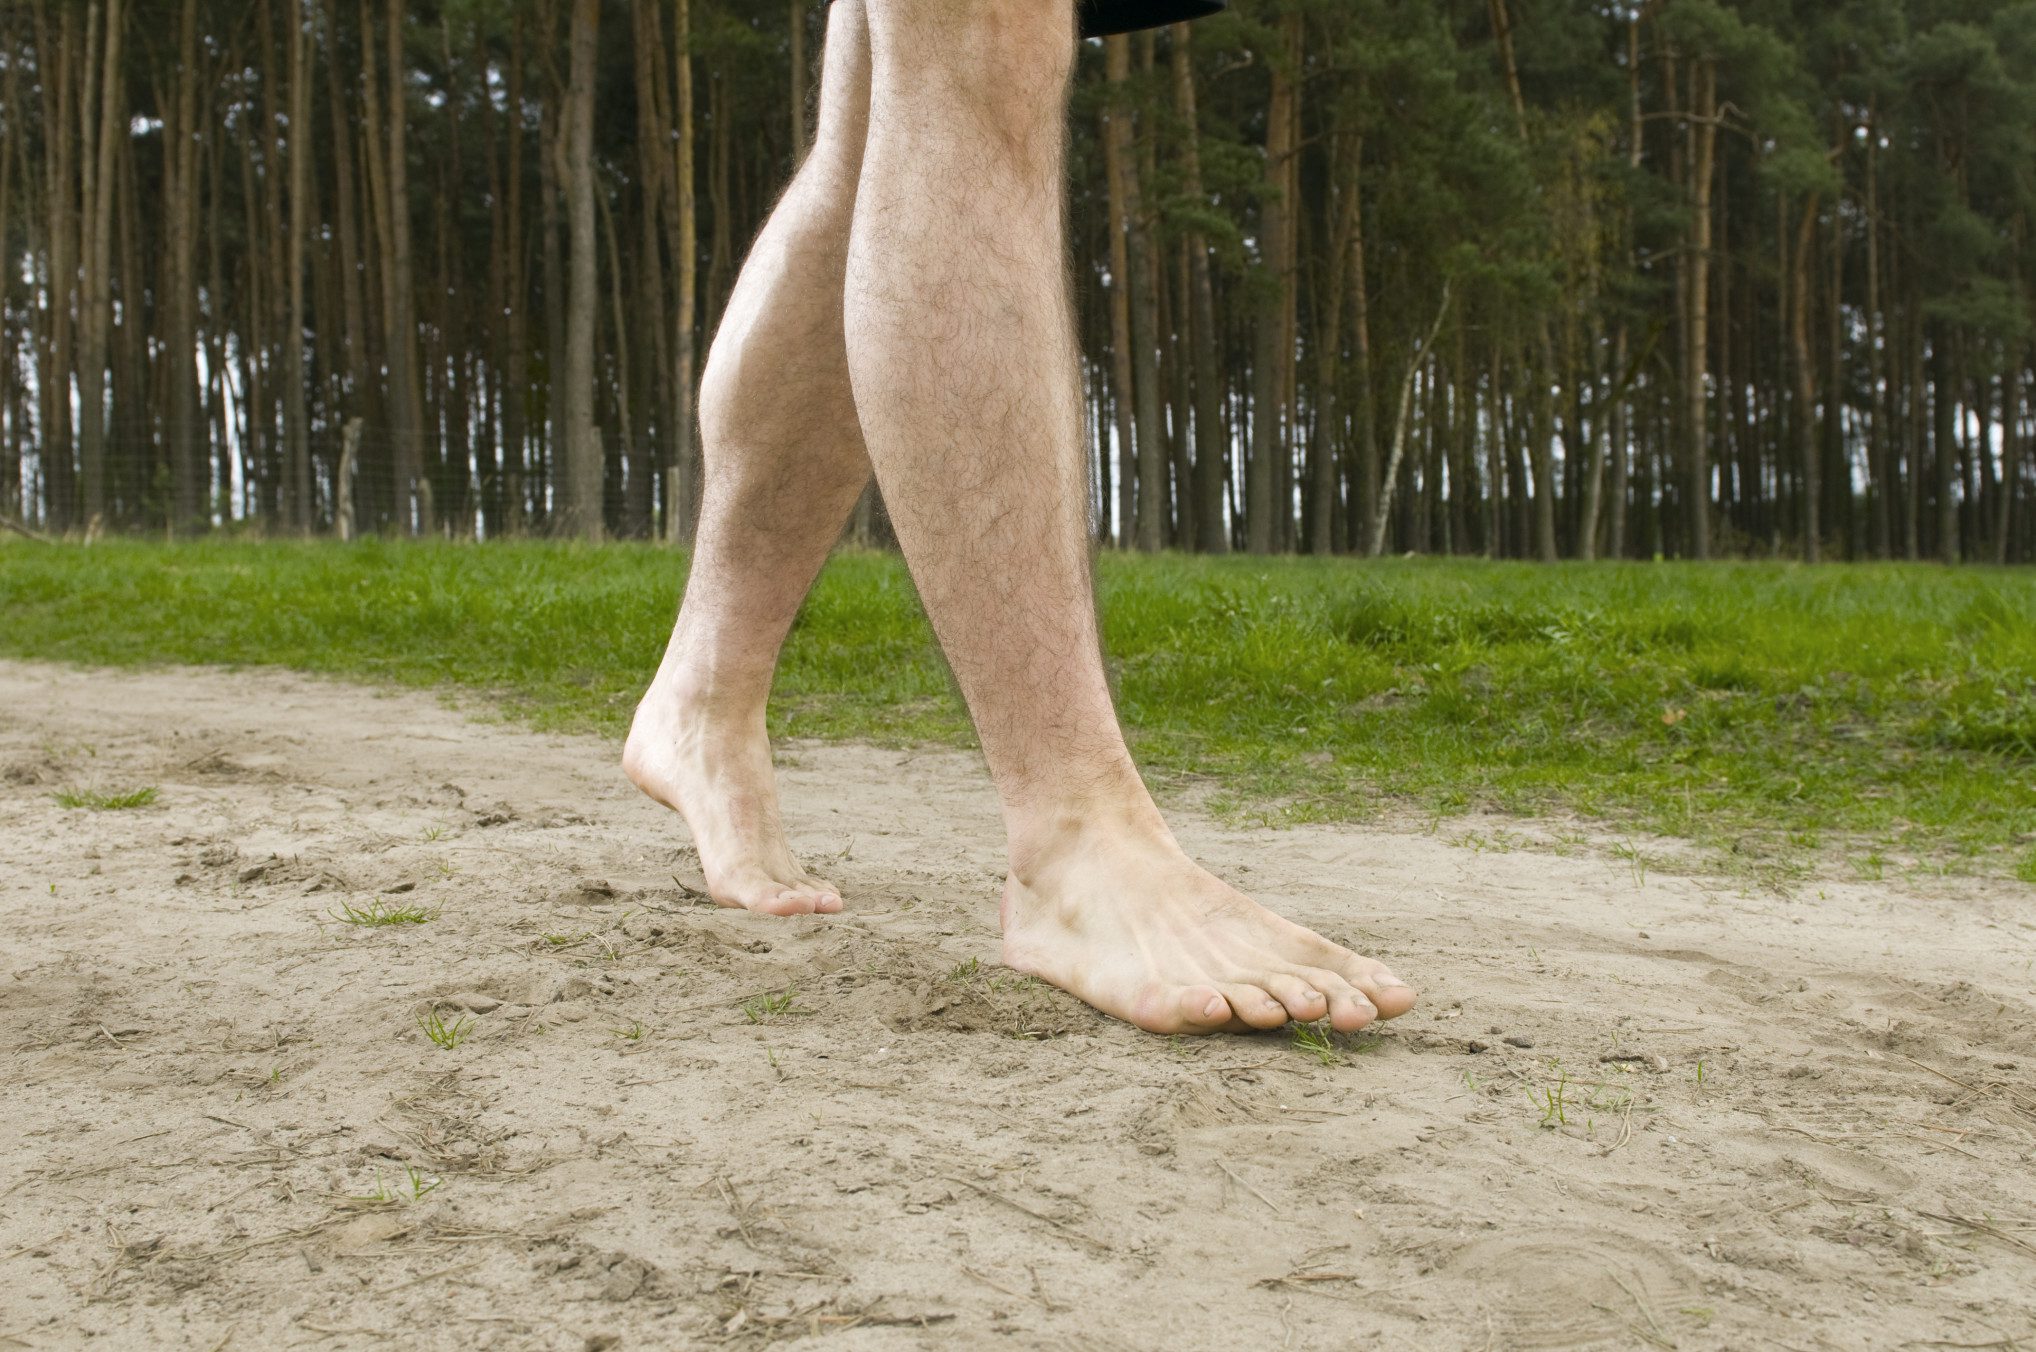 to-clad-legs-and-feet-of-a-young-man-on-a-sand-road-starting-with-wooded-background_t20_K6a1kK